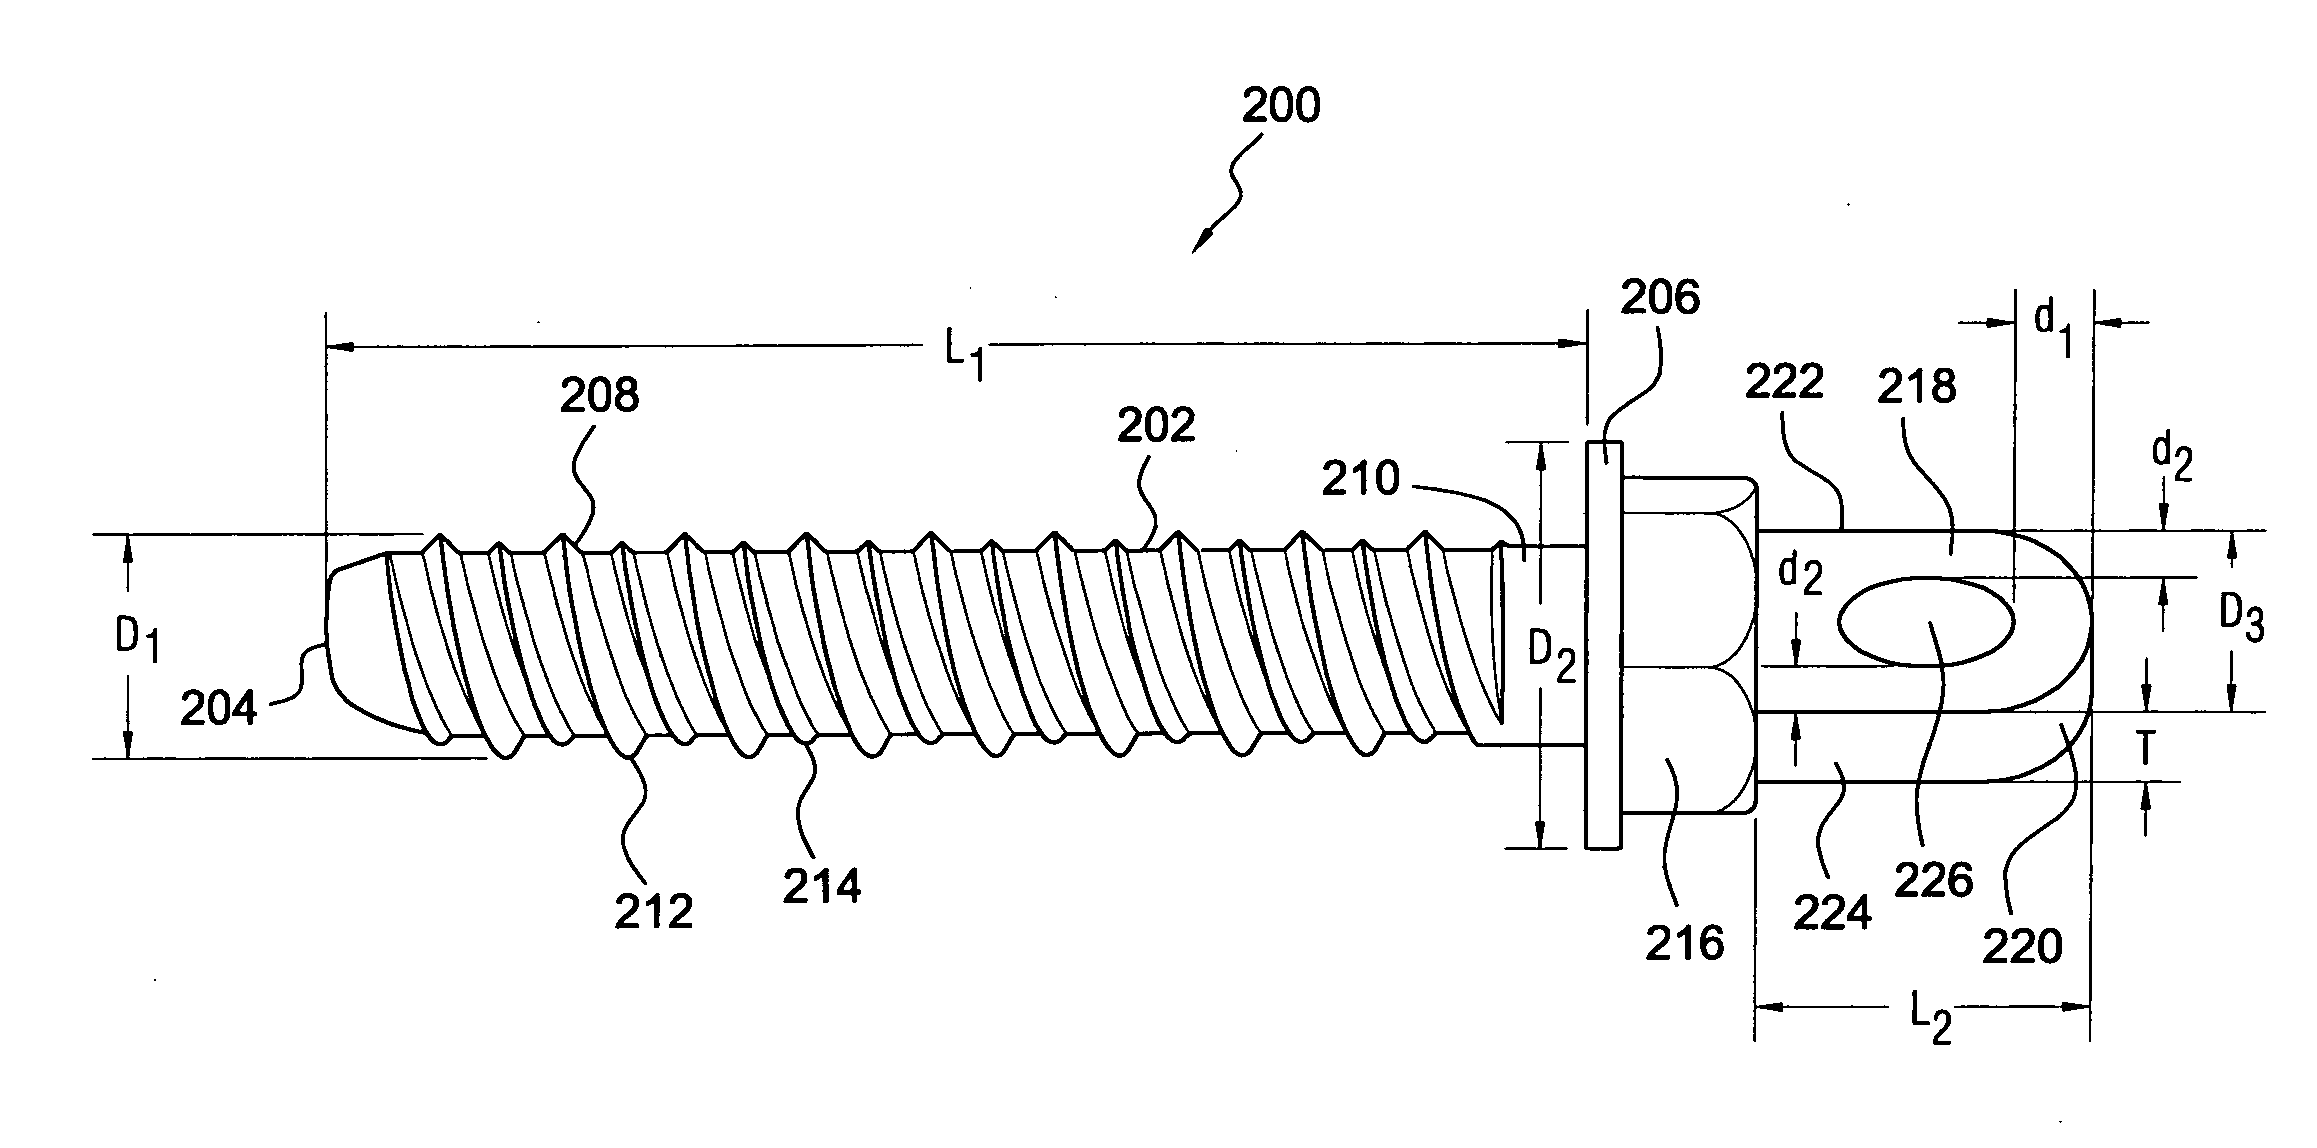 Threaded anchor having a head portion comprising a hexagonally configured drive section, and an integral projection having a transverse bore formed therein